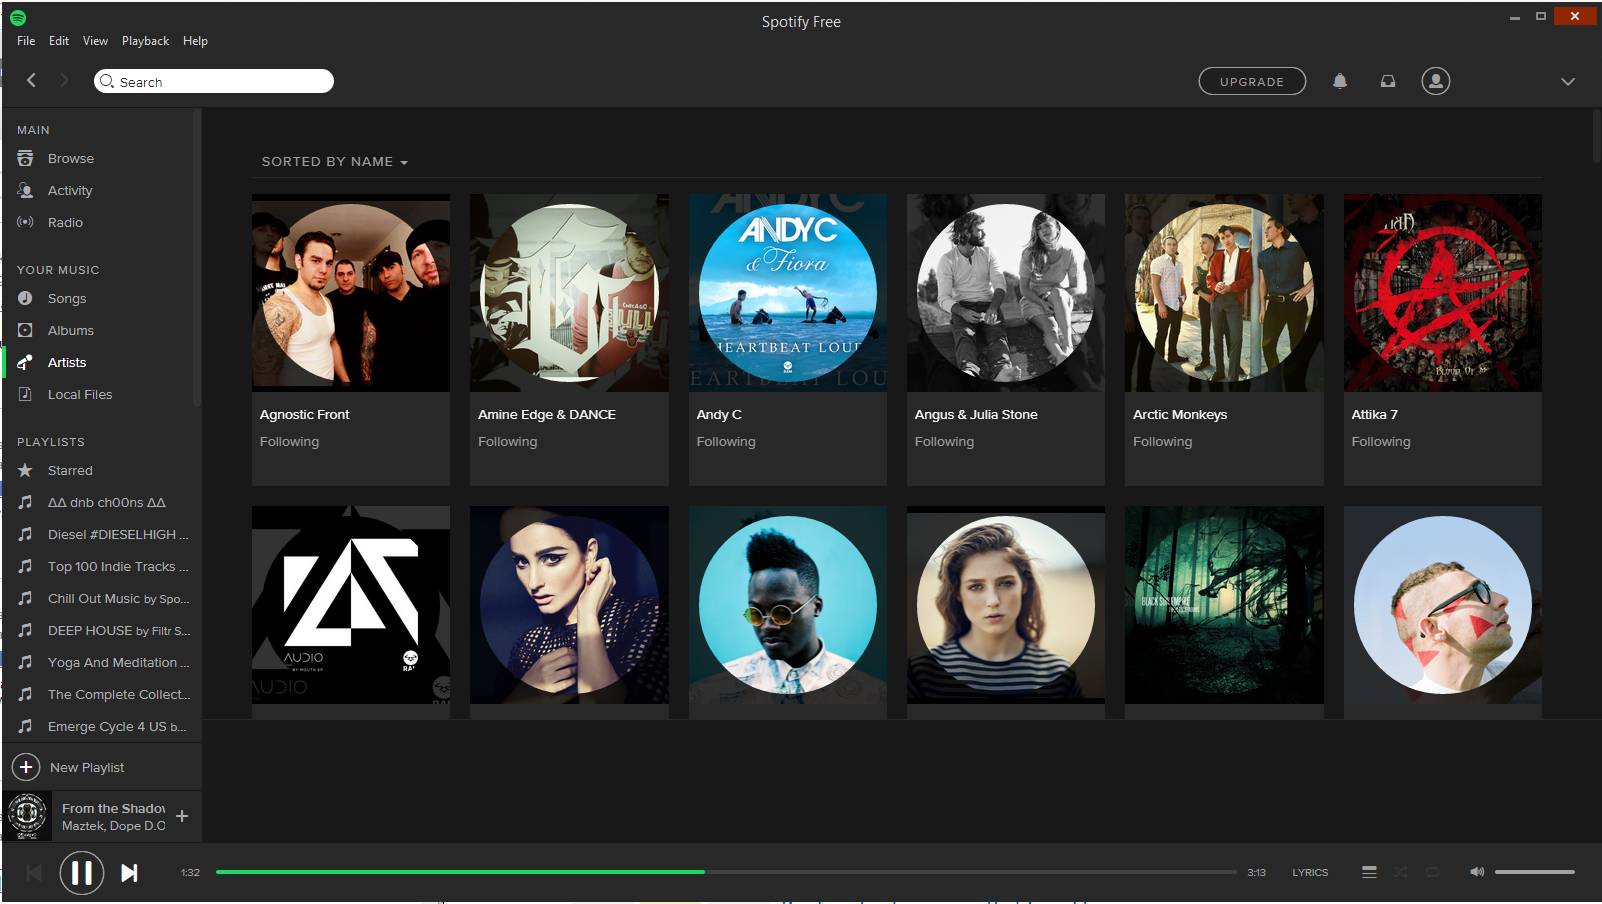 spotify app for windows 10 free download